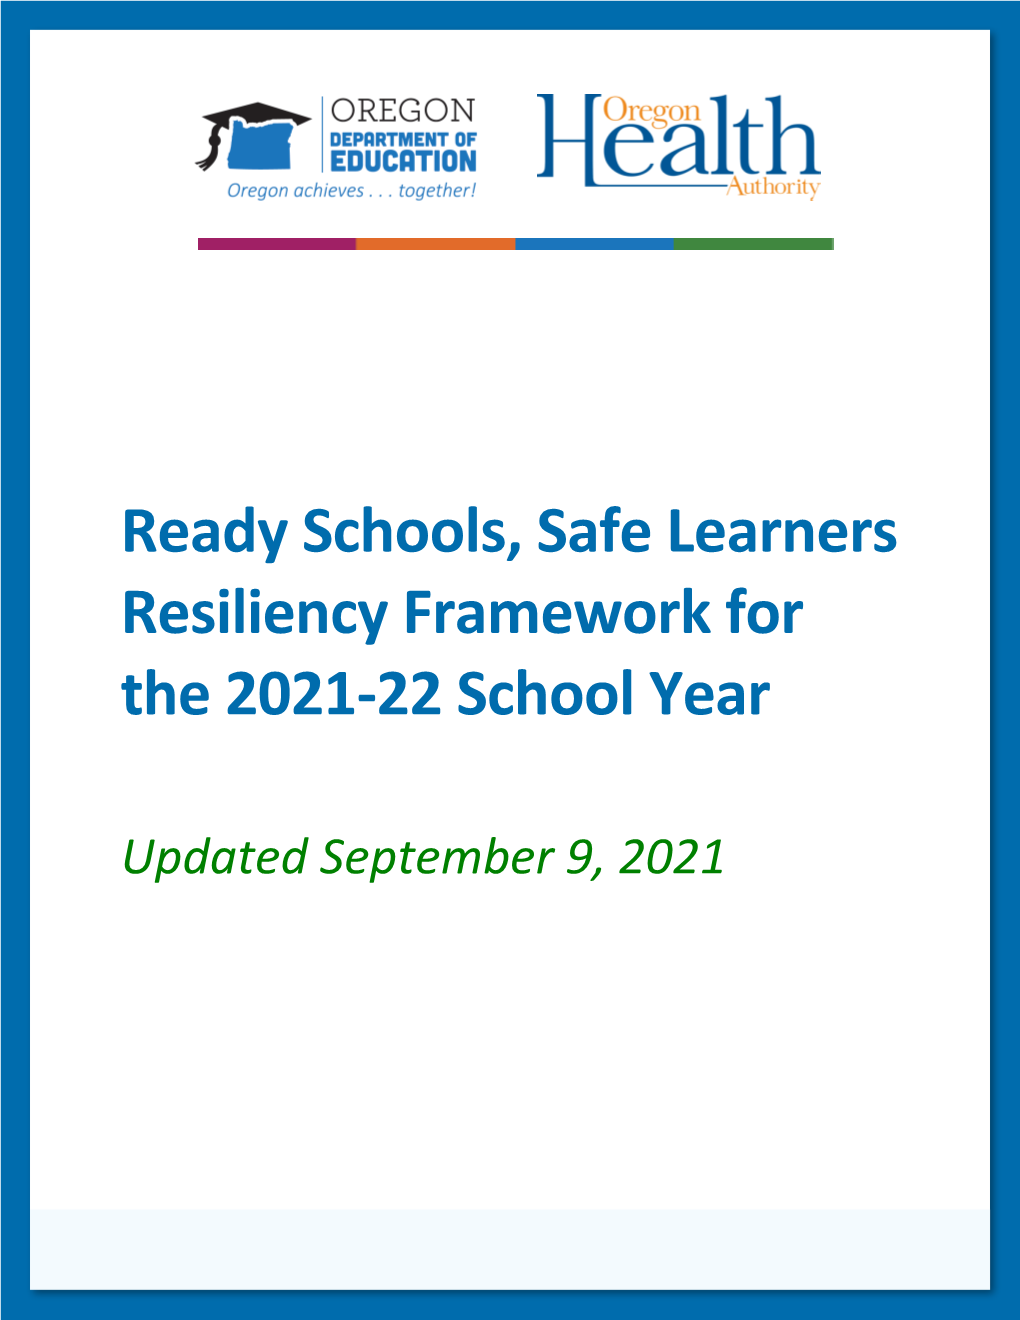 Ready Schools, Safe Learners Resiliency Framework for the 2021-22 School Year